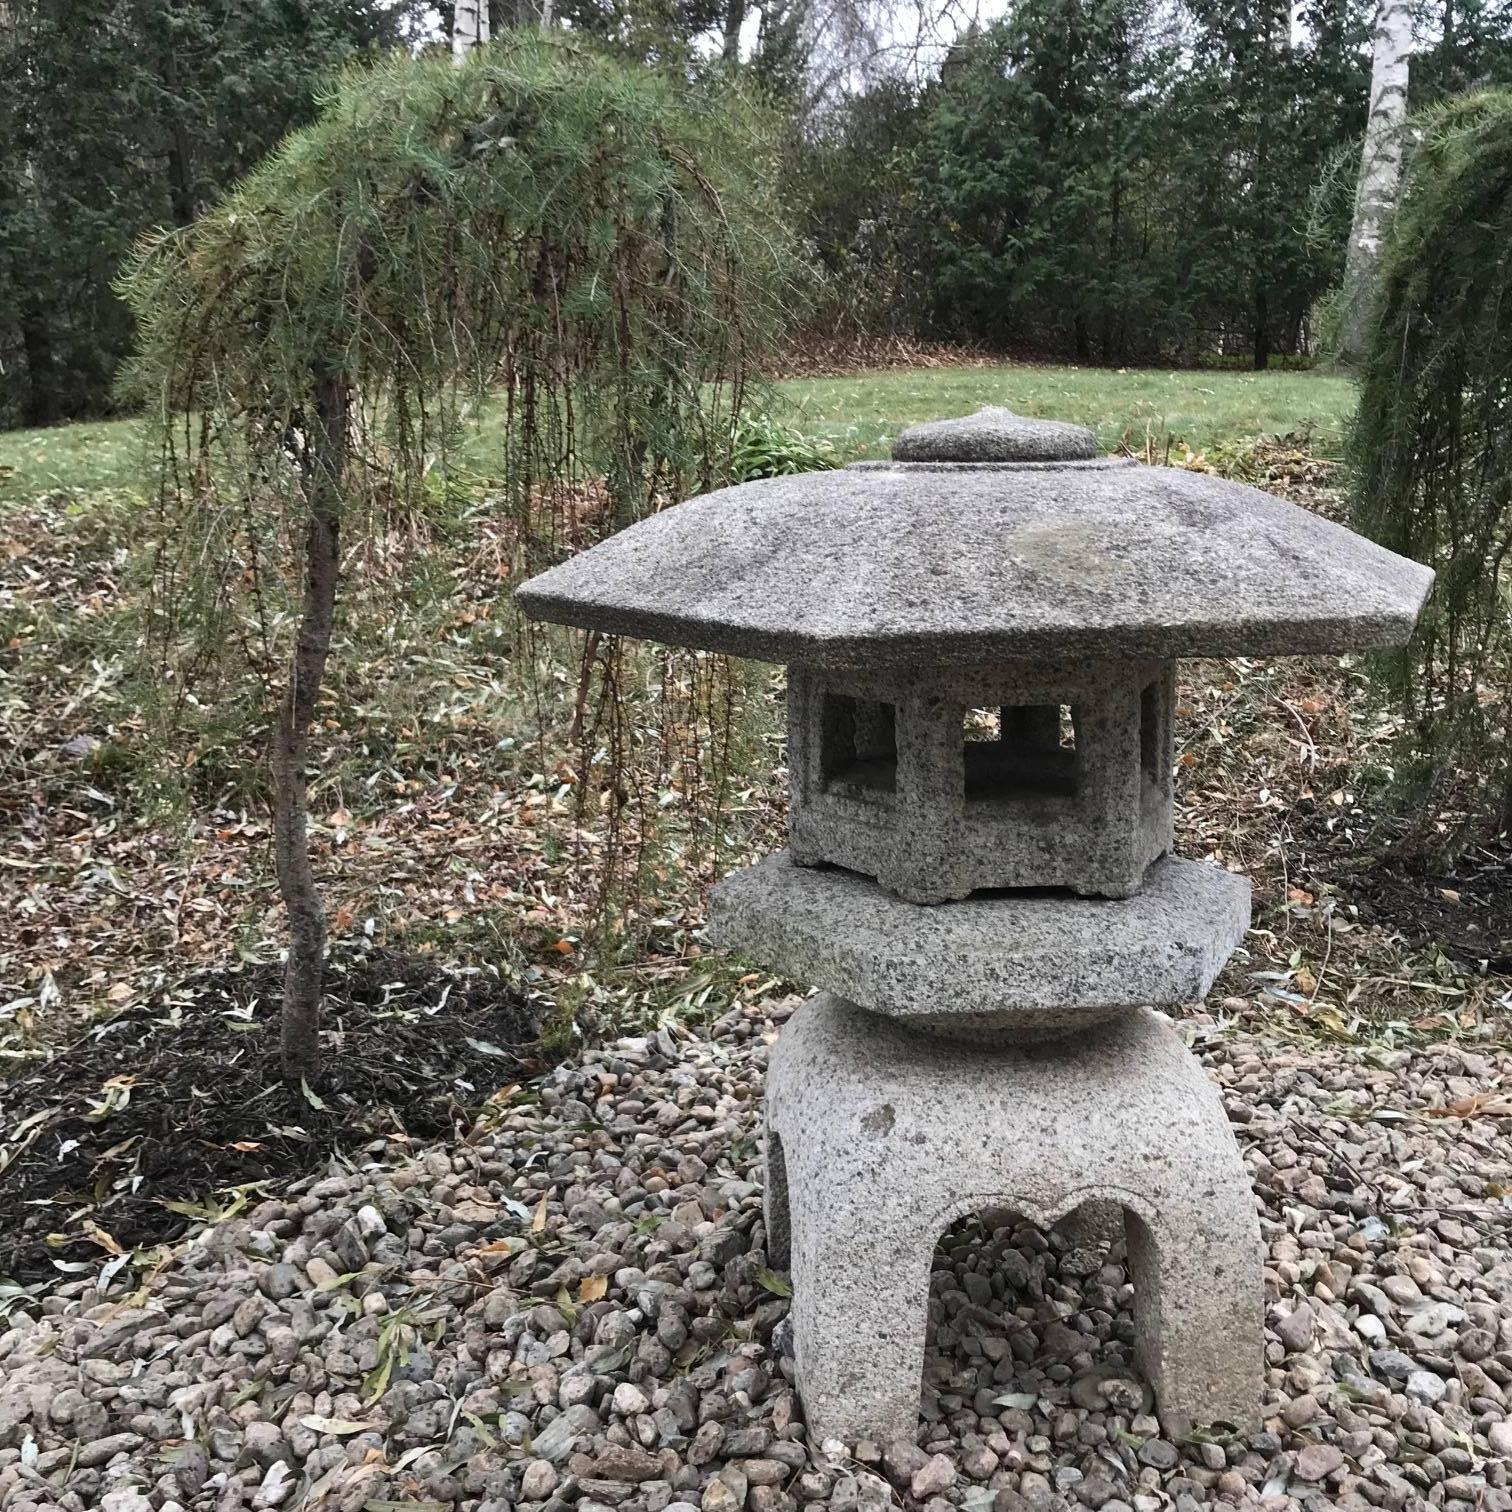 Japan a large hand carved “Yukimi” granite stone lantern (also known as a snow lantern because of its broad roof), four pieces, 

Dimensions: 34 inches high and 34 inches wide

Period:  Meiji period, 19th century

Quality:  A beautiful example